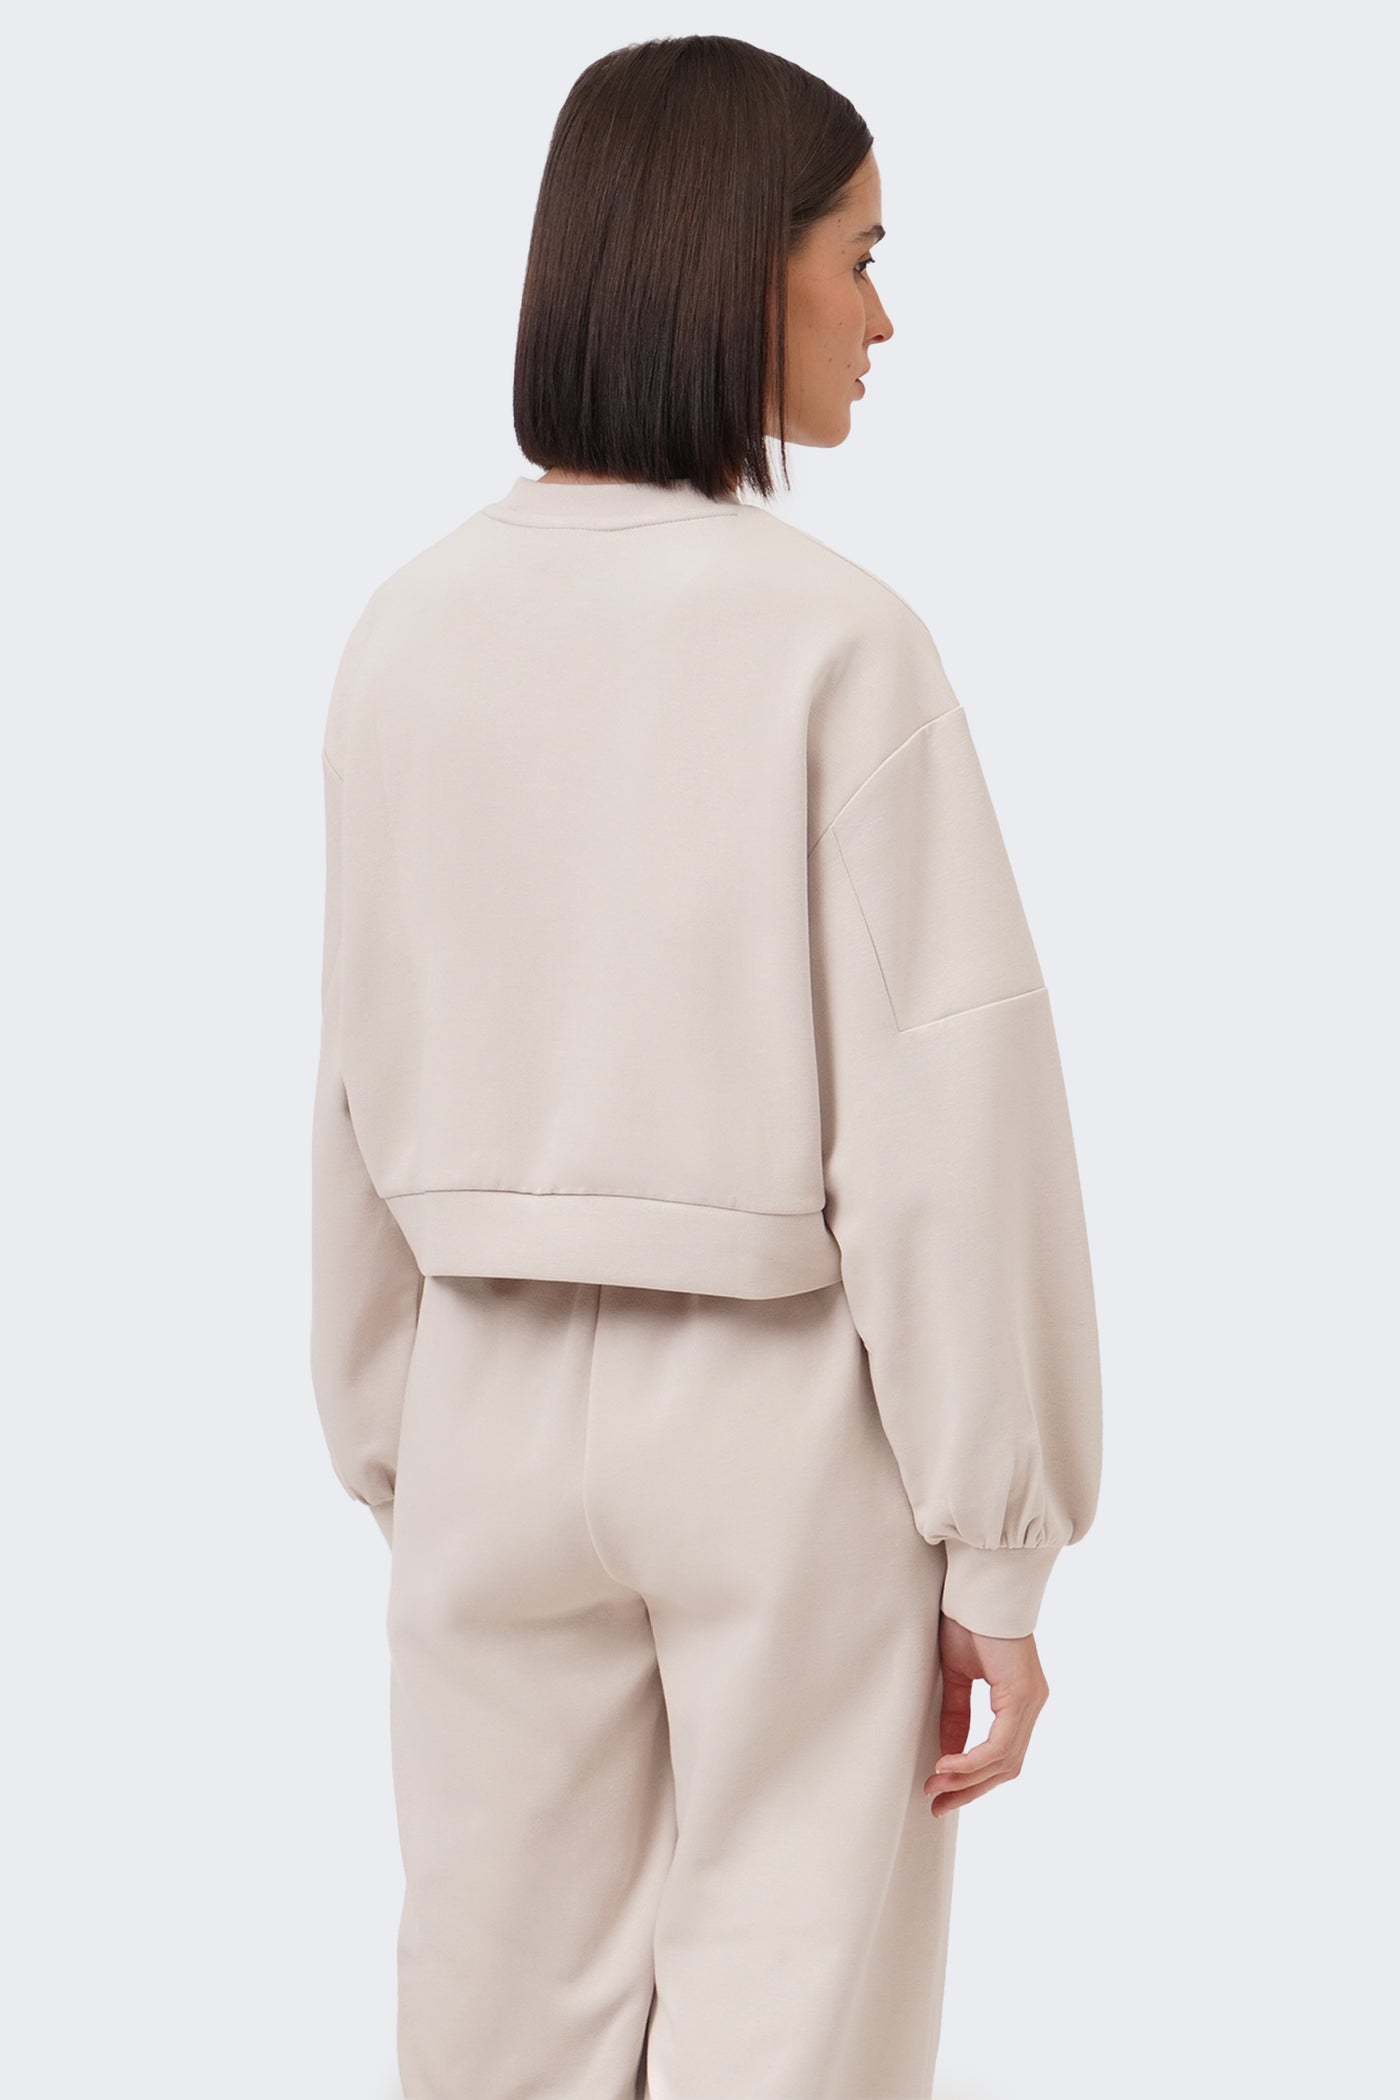 Women's Panel Sleeve Cropped Sweater